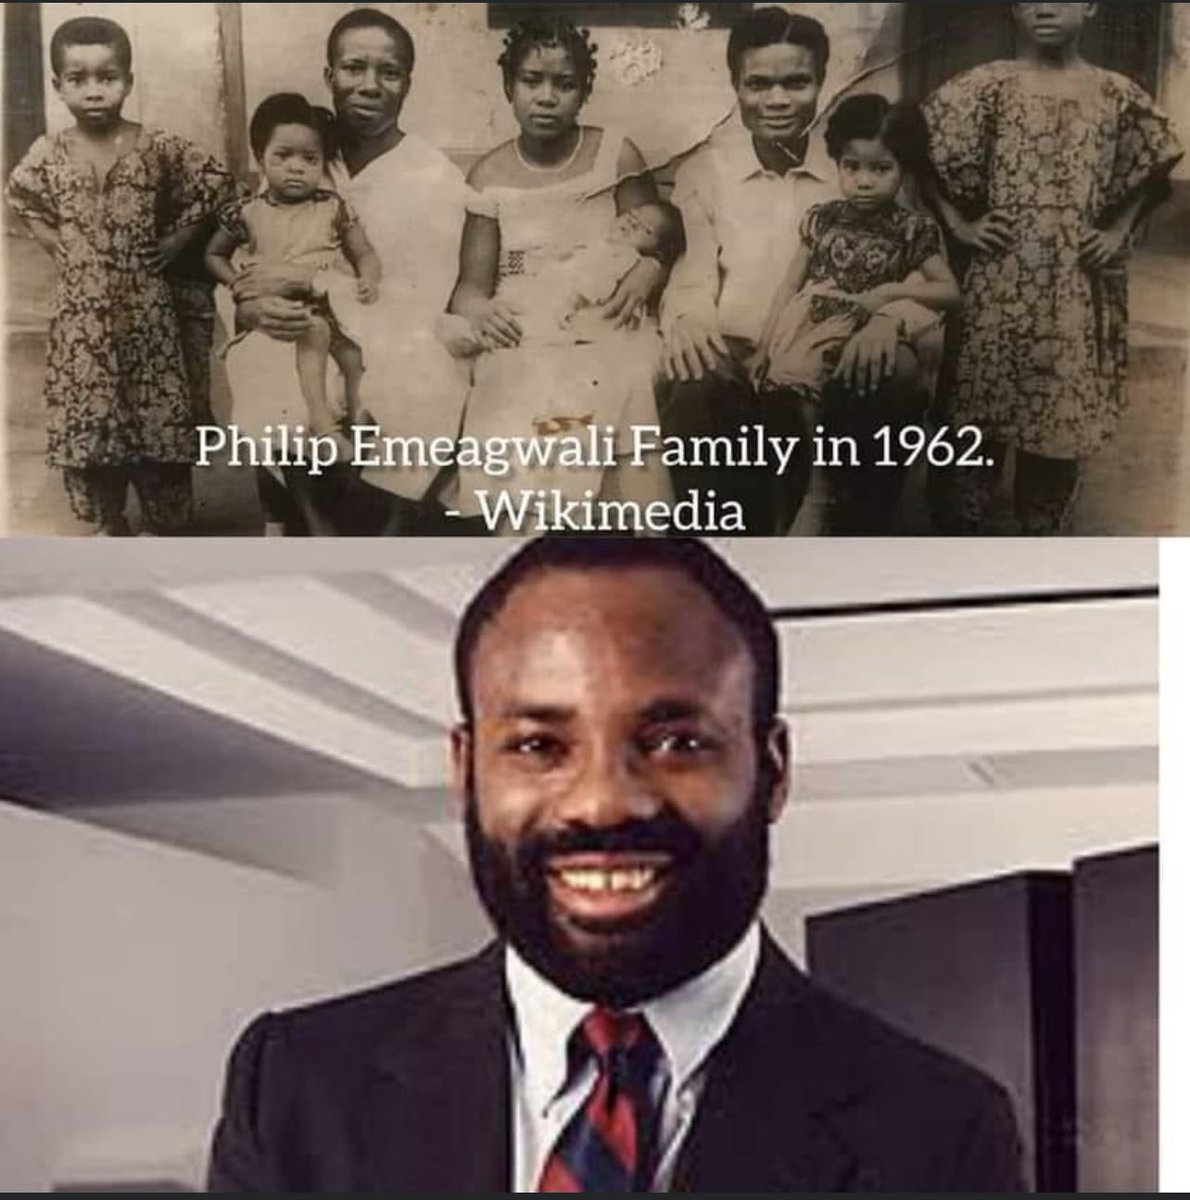 Dr. Philip Emeagwali is the Inventor of the World's Fastest Computer. 

Popularly called the 'Bill Gates of Africa', the  Famous Black Inventor from Onitsha, Anambra State Igbo land, was born in Akure, Ondo State Nigeria.

Like many African schoolchildren,